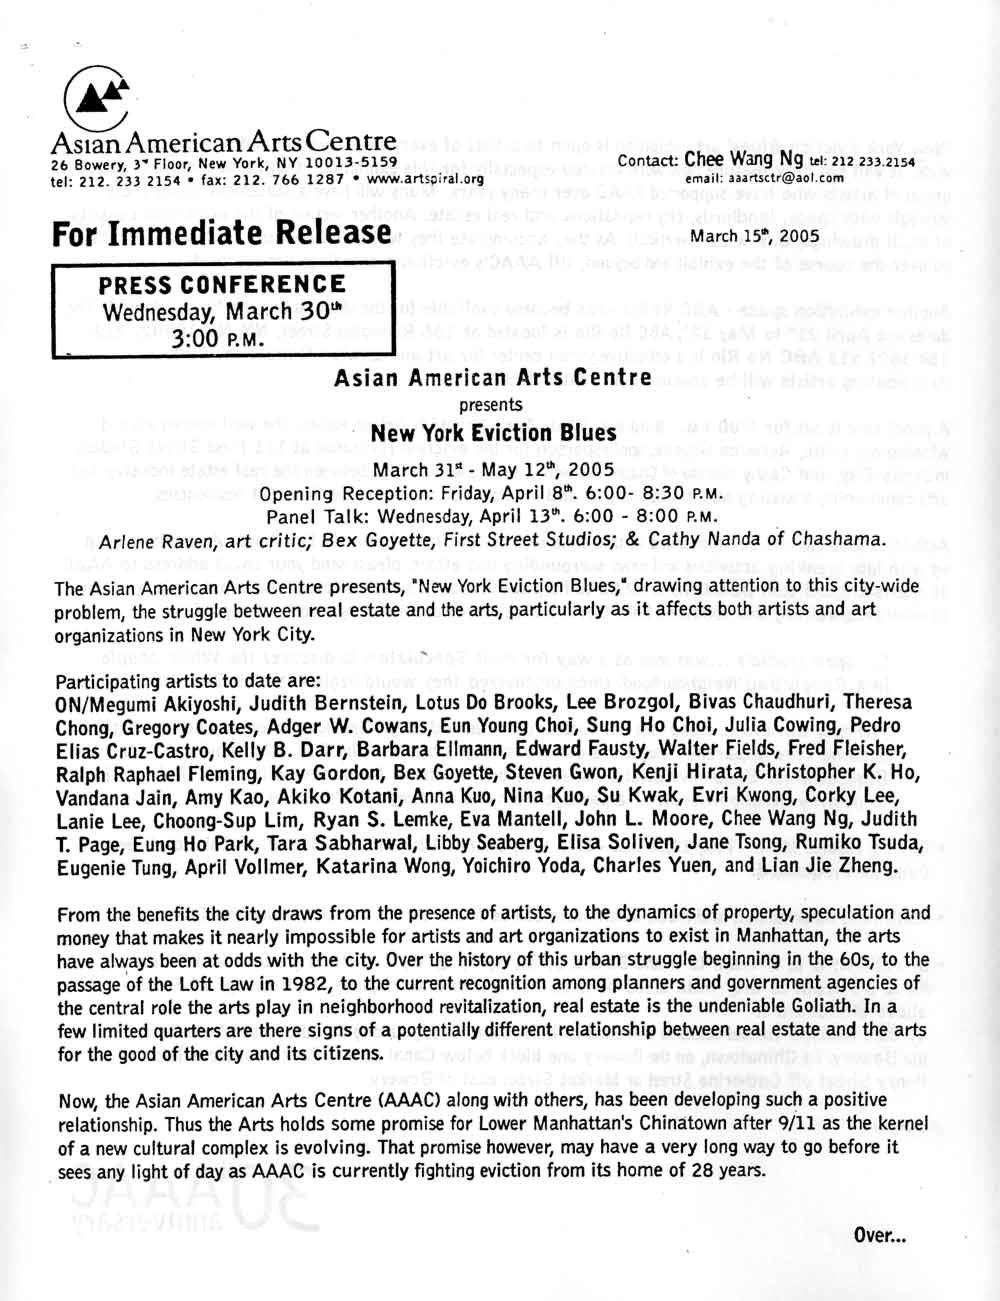 Eviction Blues press release, pg 1